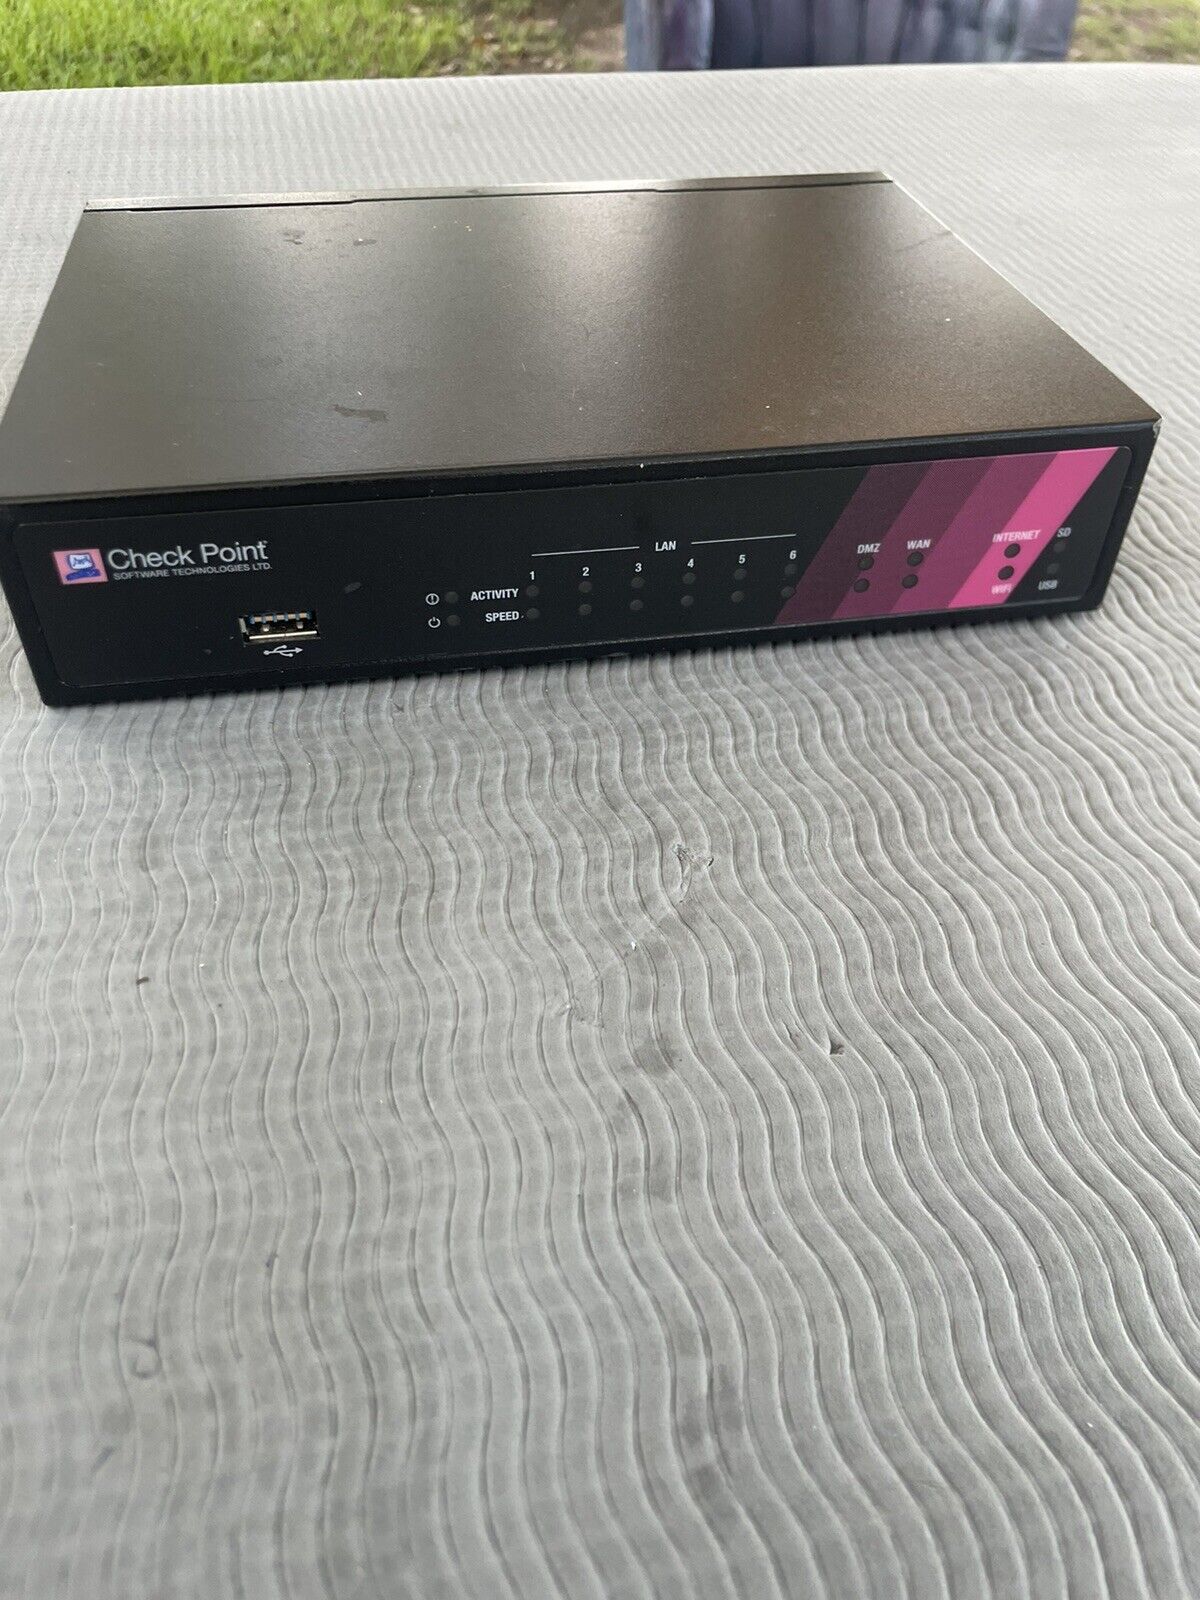 Check Point L-71W Wi-Fi Firewall With Power Cord Tested